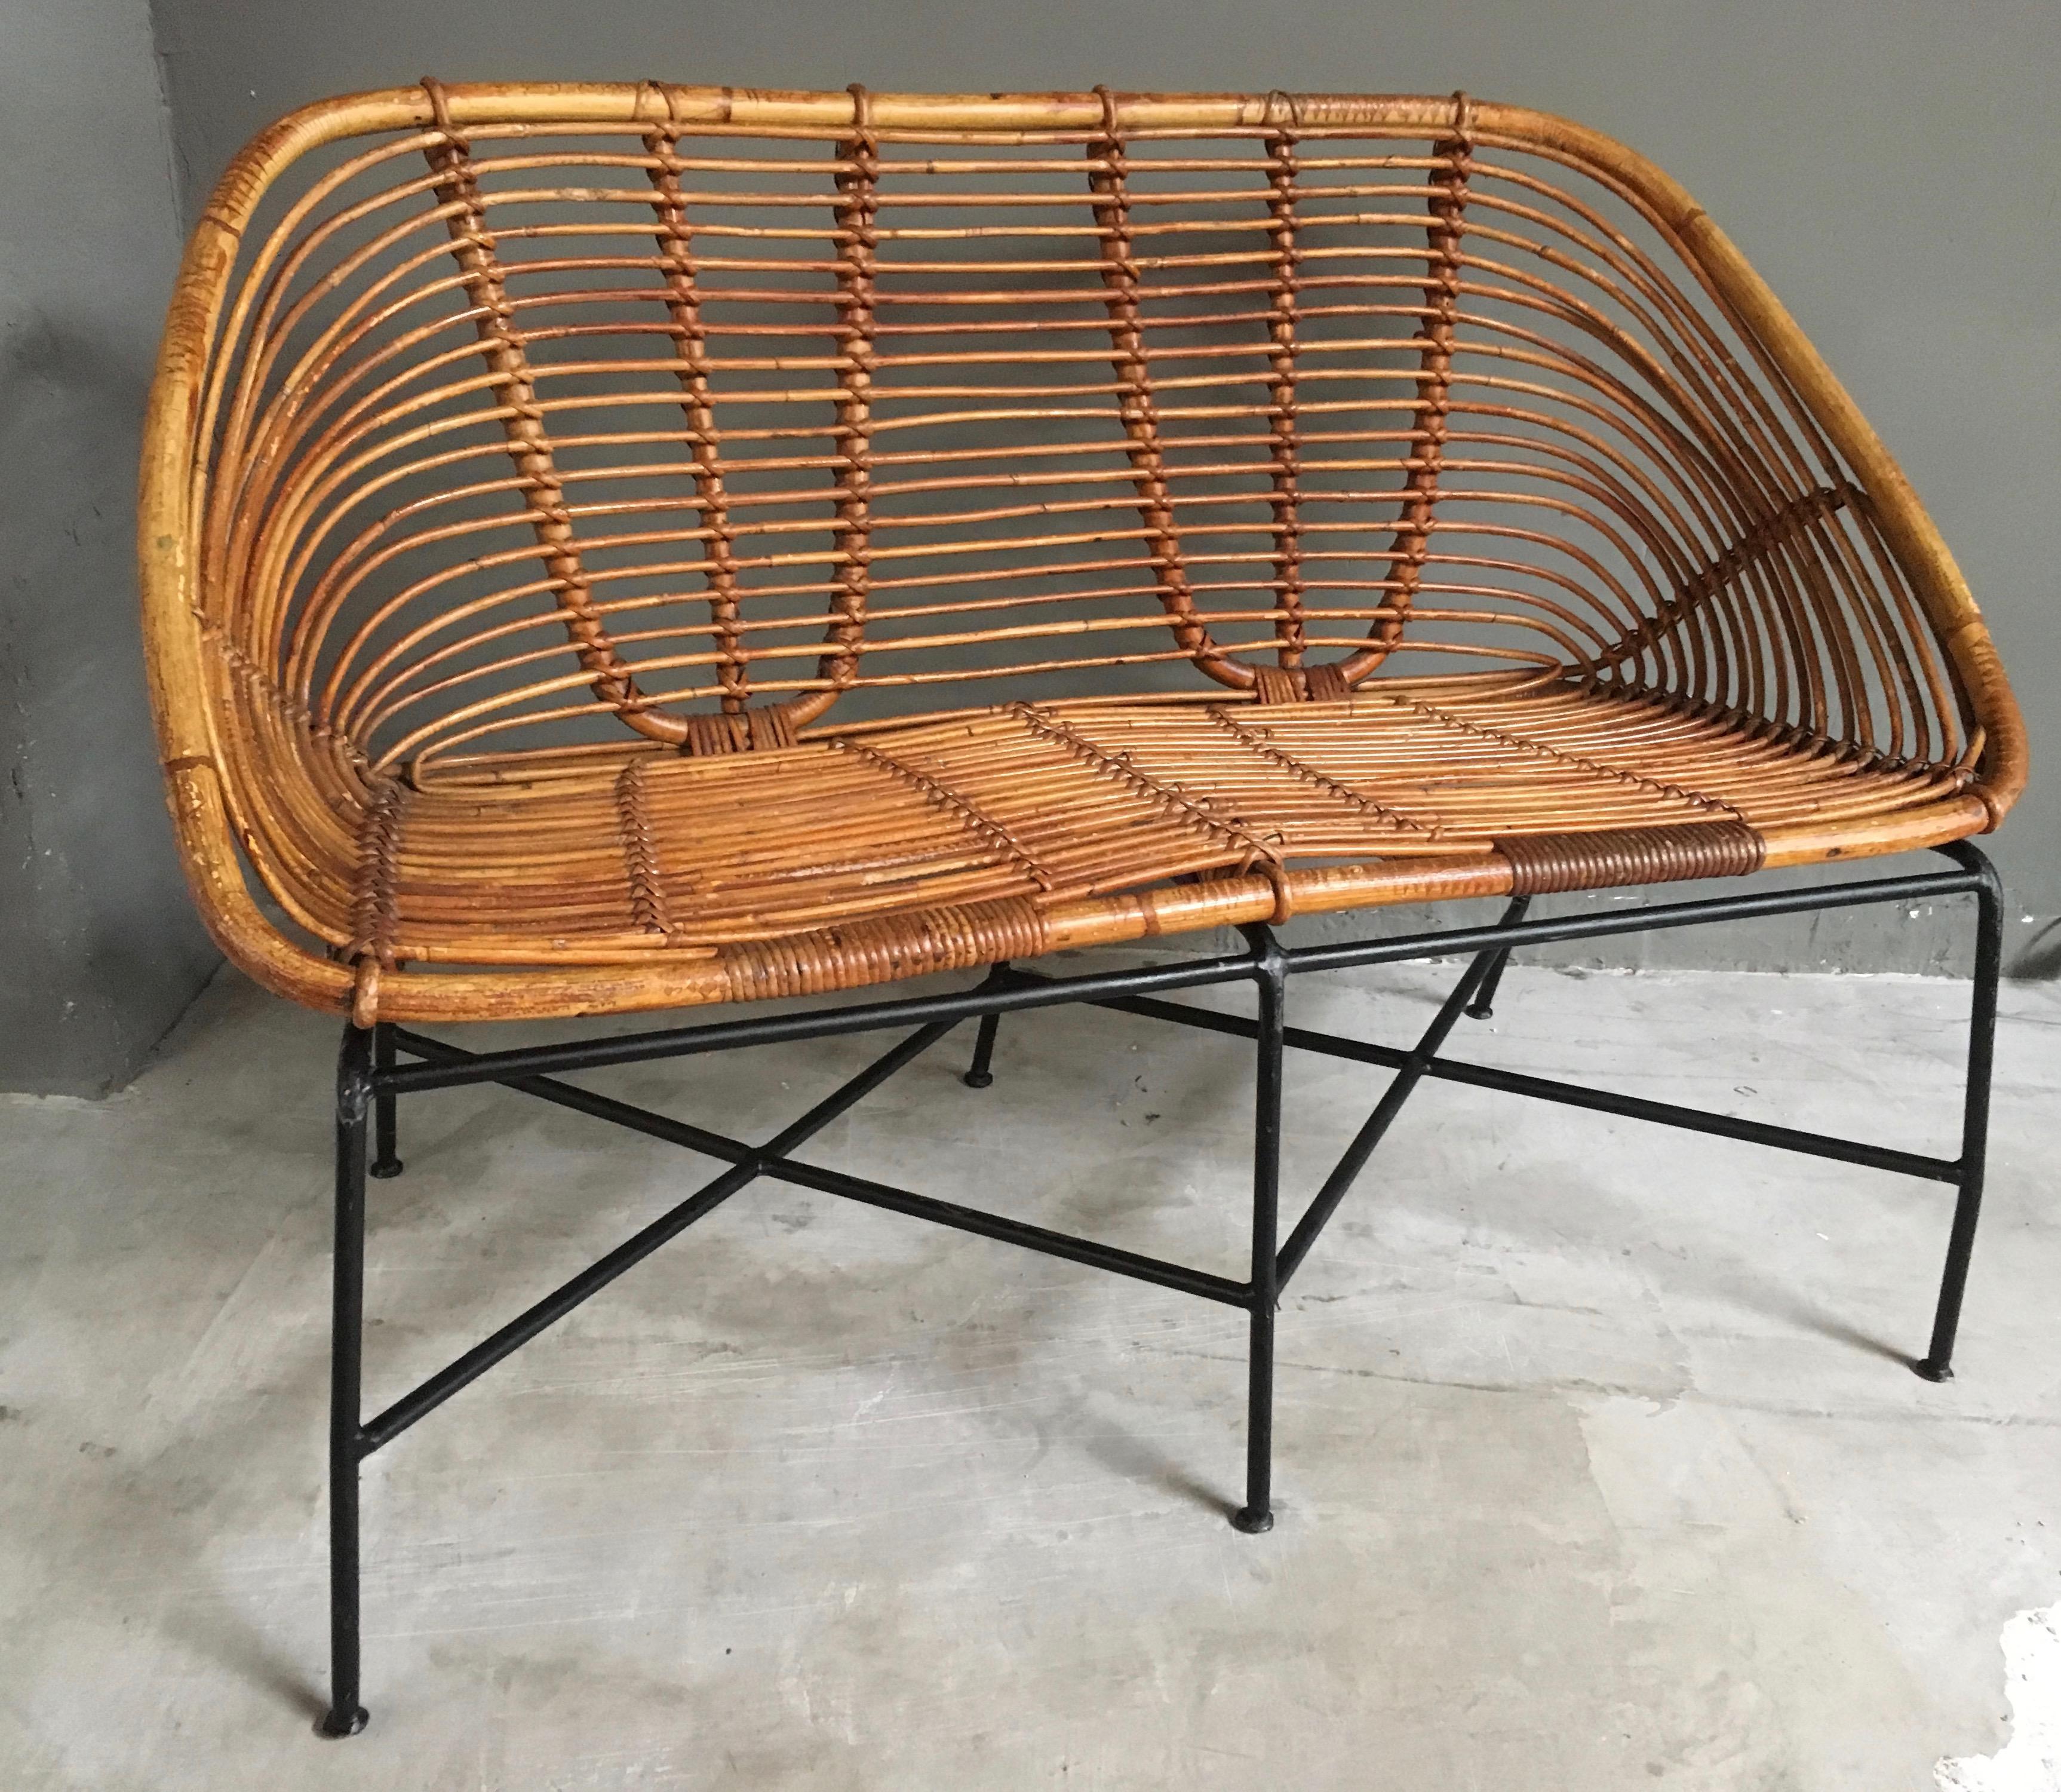 Elegant French rattan, wicker and iron settee. Rattan in excellent condition. Iron frame with criss-cross base. Excellent vintage condition. 

Matching chairs available in separate listing.
  
 